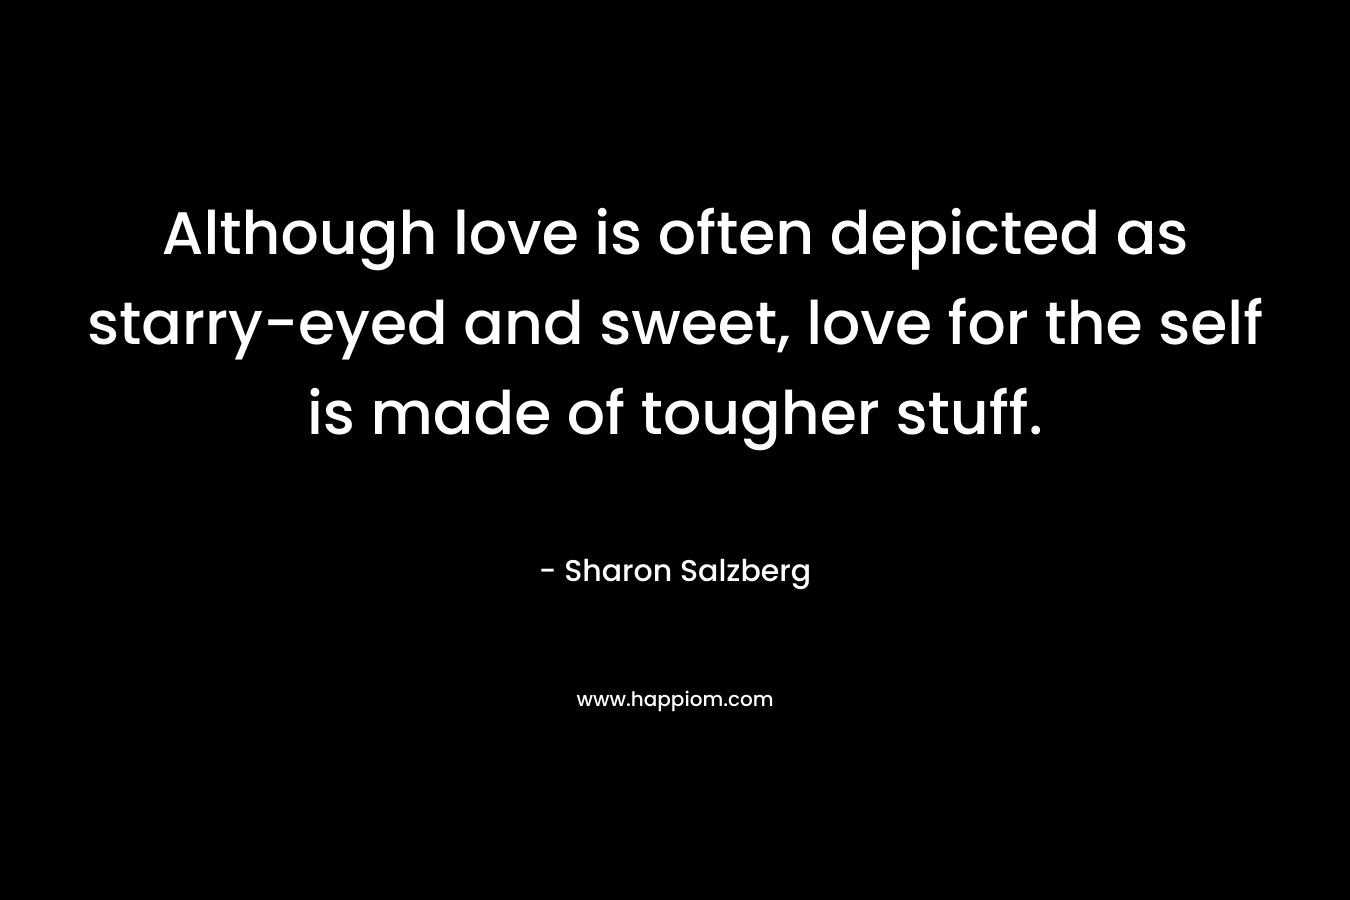 Although love is often depicted as starry-eyed and sweet, love for the self is made of tougher stuff. – Sharon Salzberg